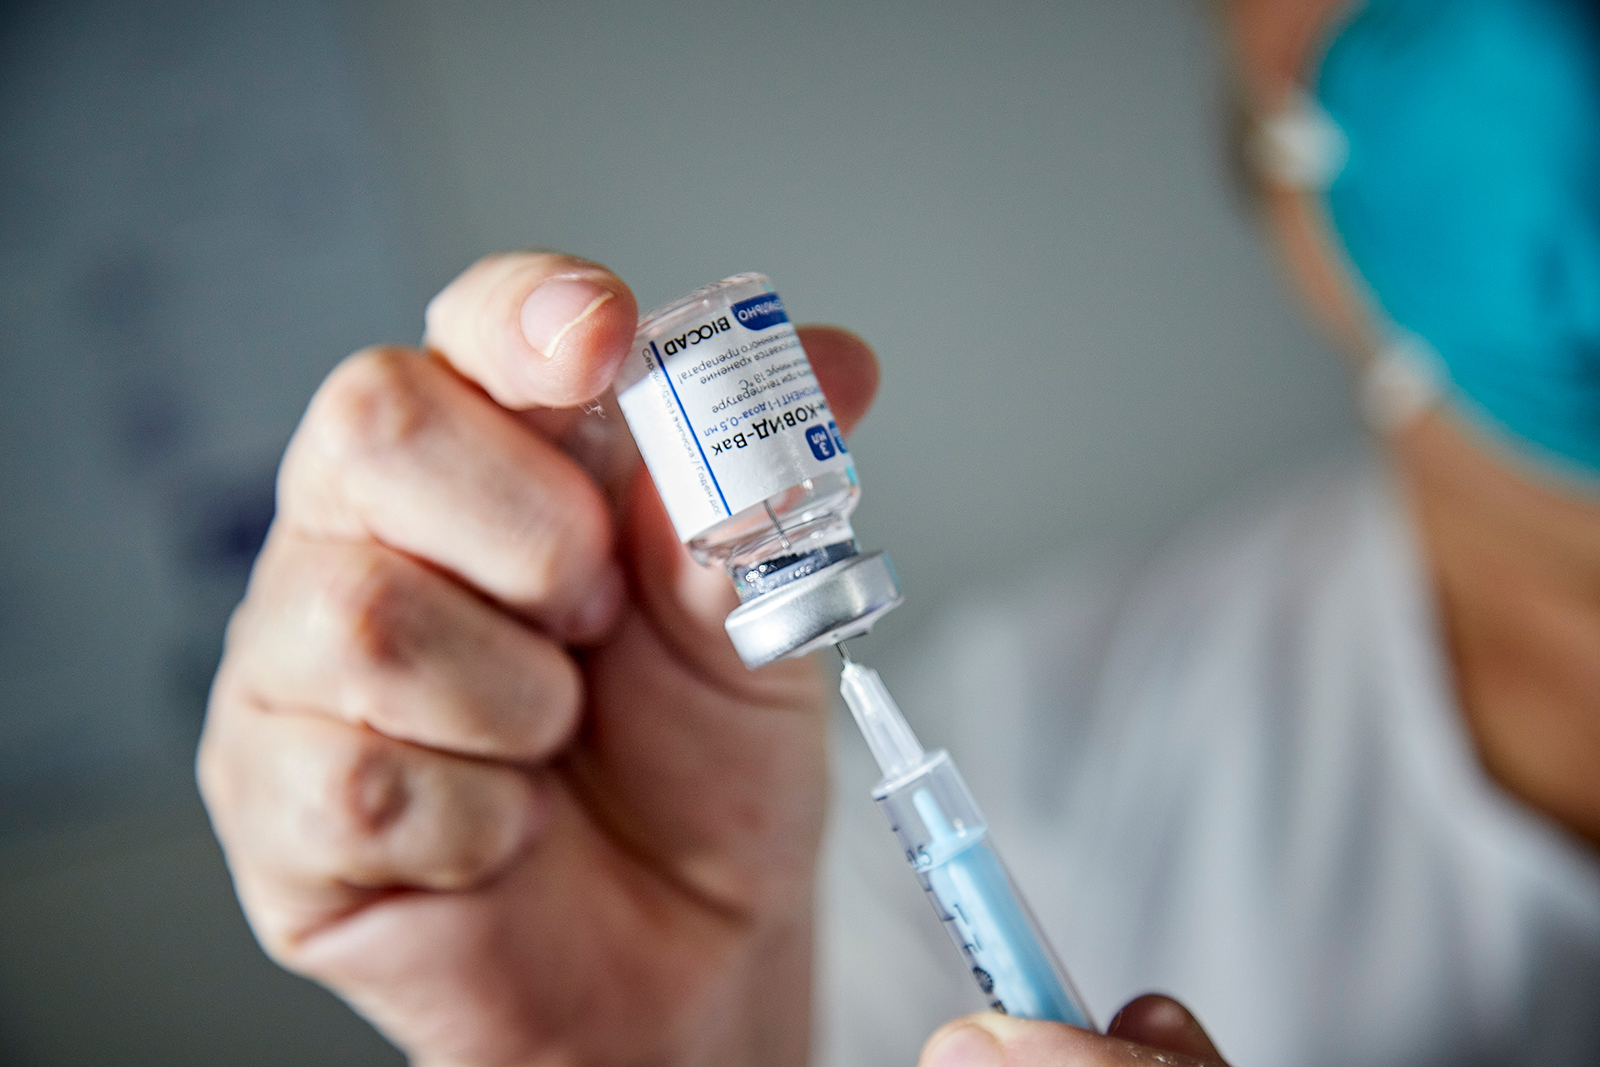 A health worker prepares the first dose of 'Gam-COVID-Vac', also known as Sputnik V vaccine, at Luis Lagomaggiore Hospital in Mendoza, Argentina, on December 29, 2020.